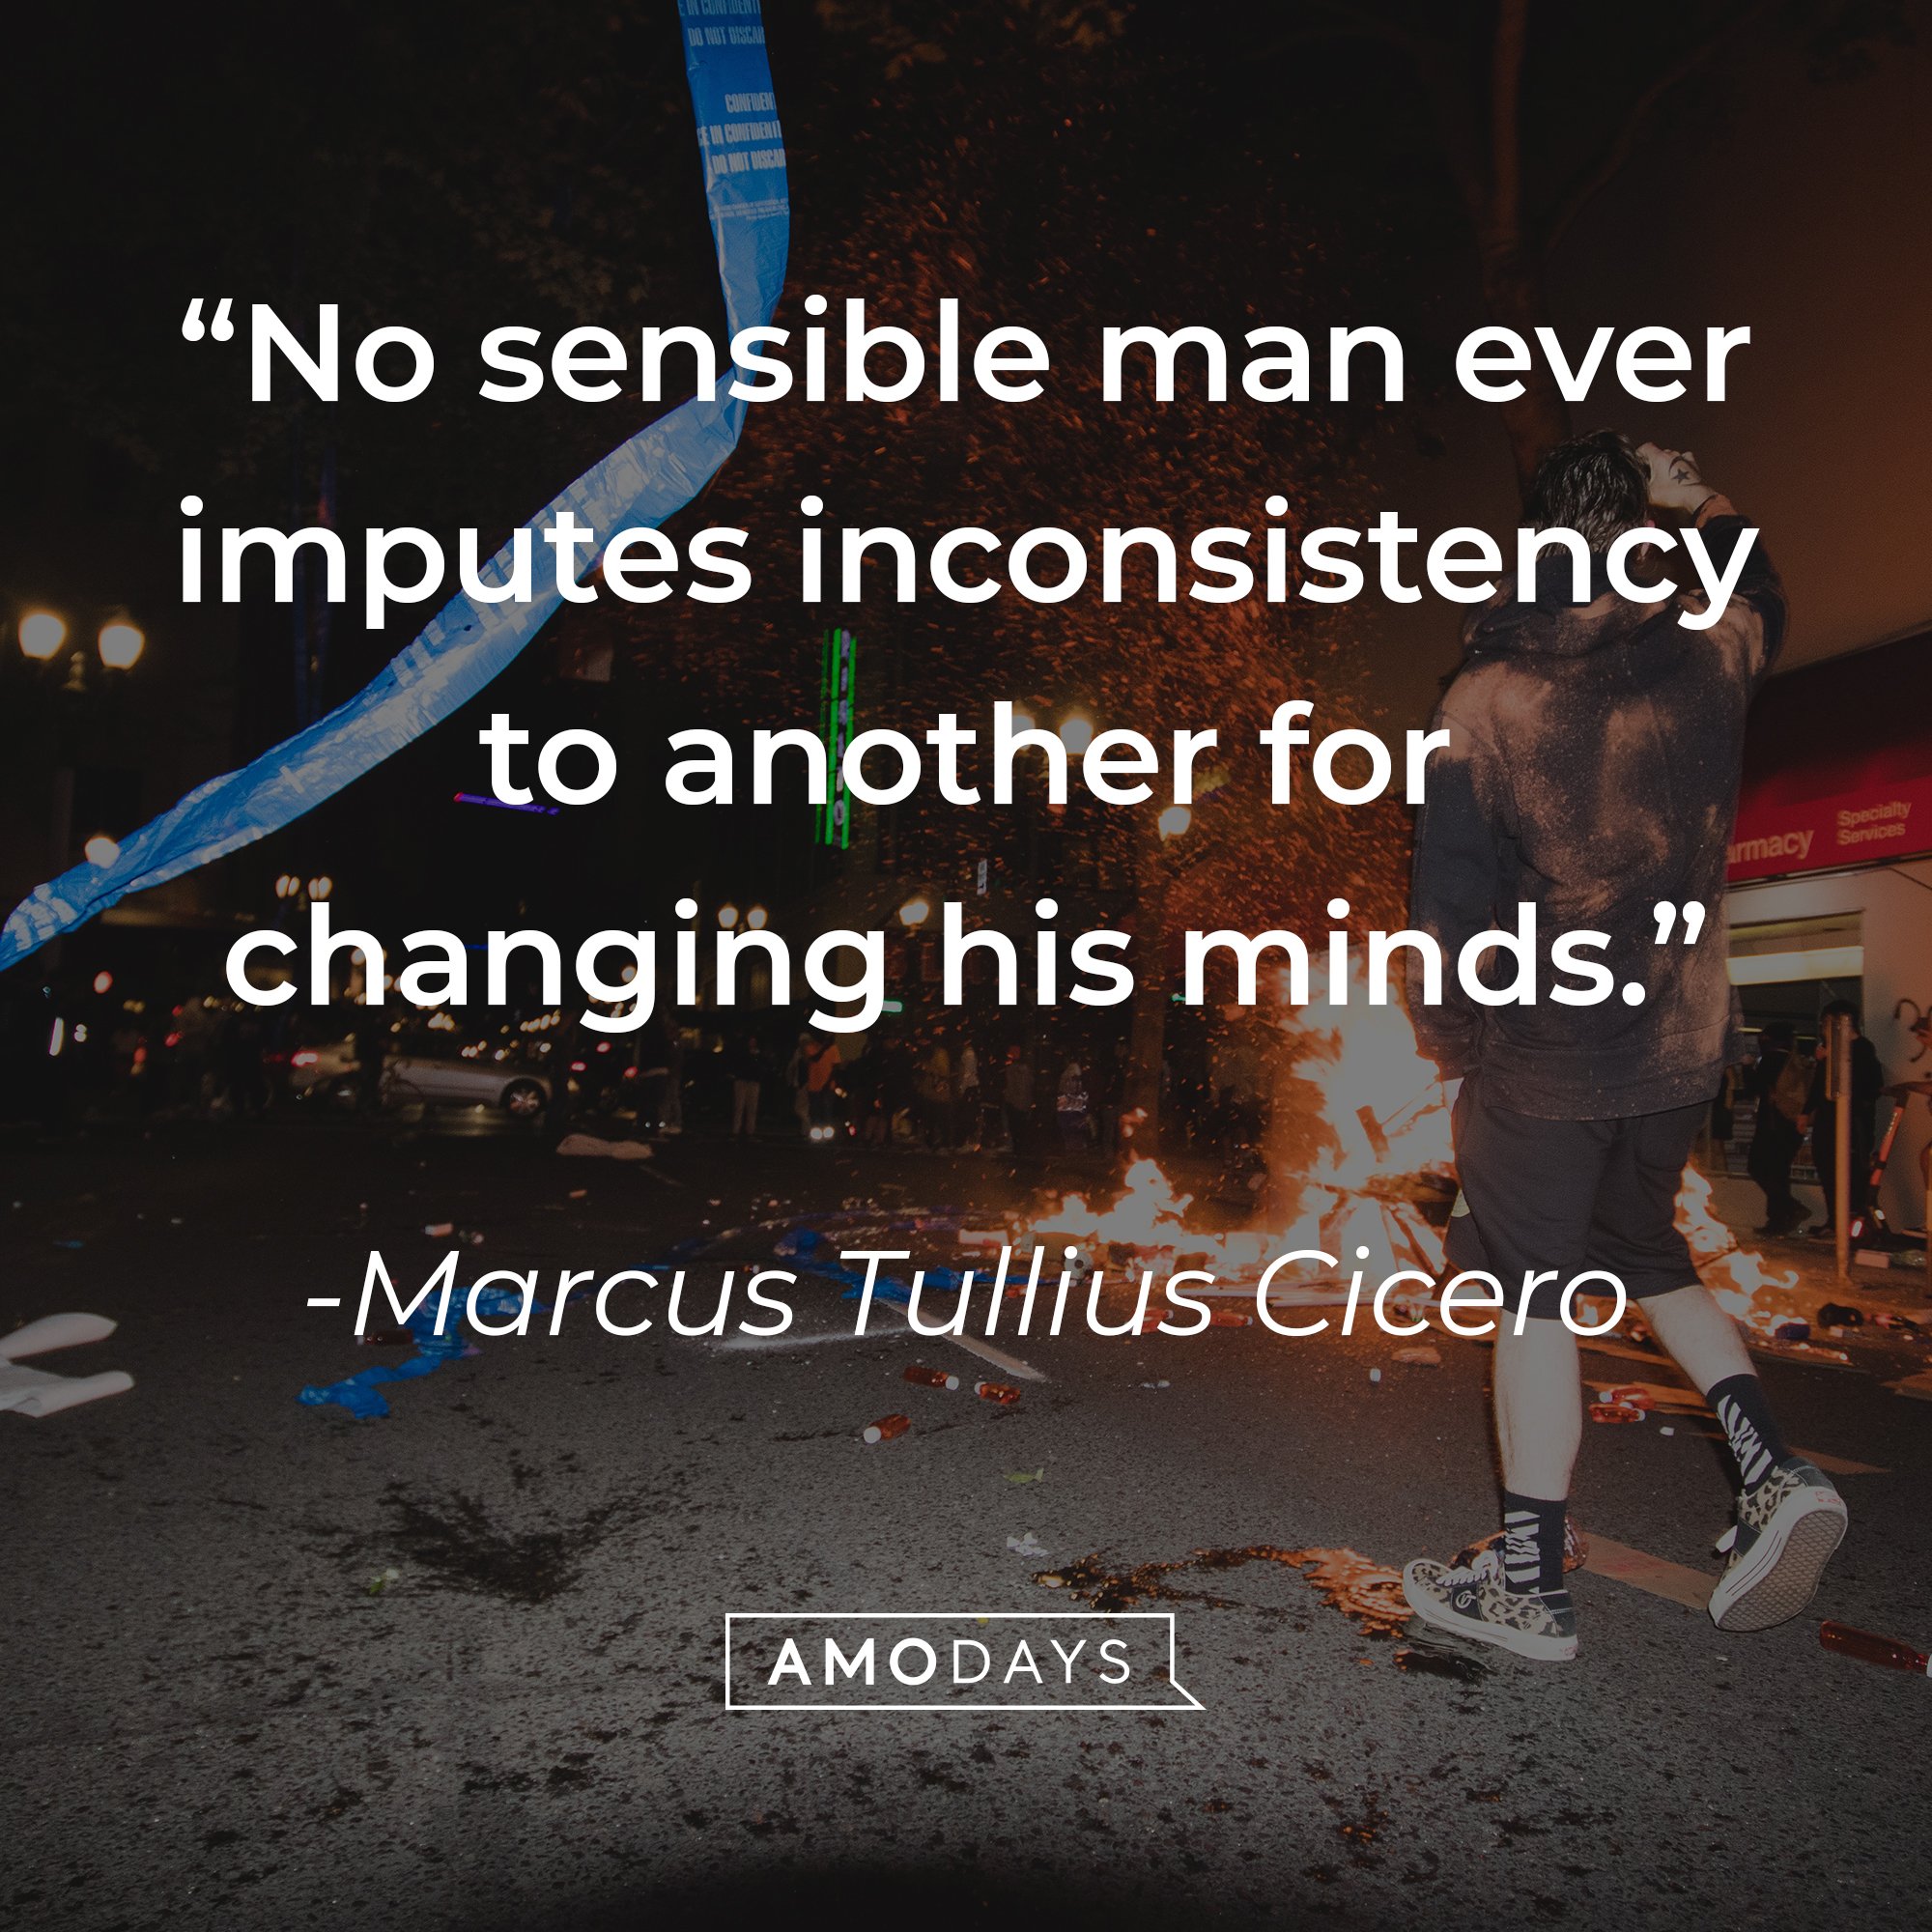 Marcus Tullius Cicero's quote: "No sensible man ever imputes inconsistency to another for changing his minds." | Image: AmoDays